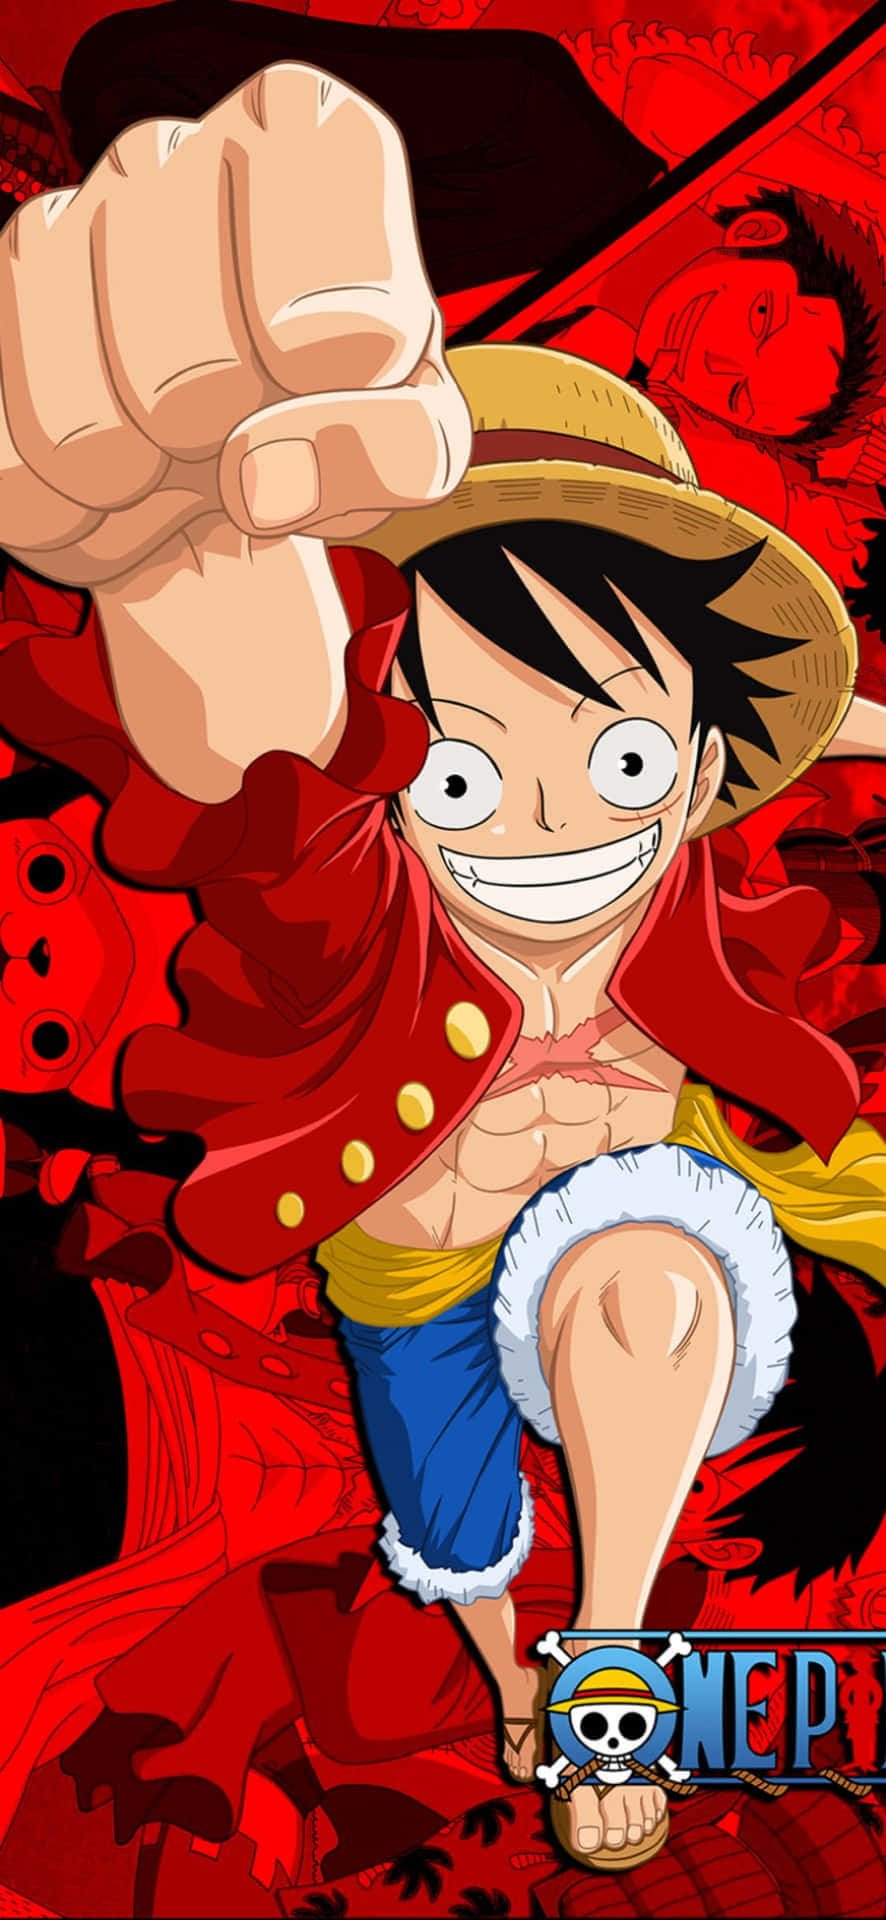 One Piece wallpapers for iPhone in 2023 (Free 4k download